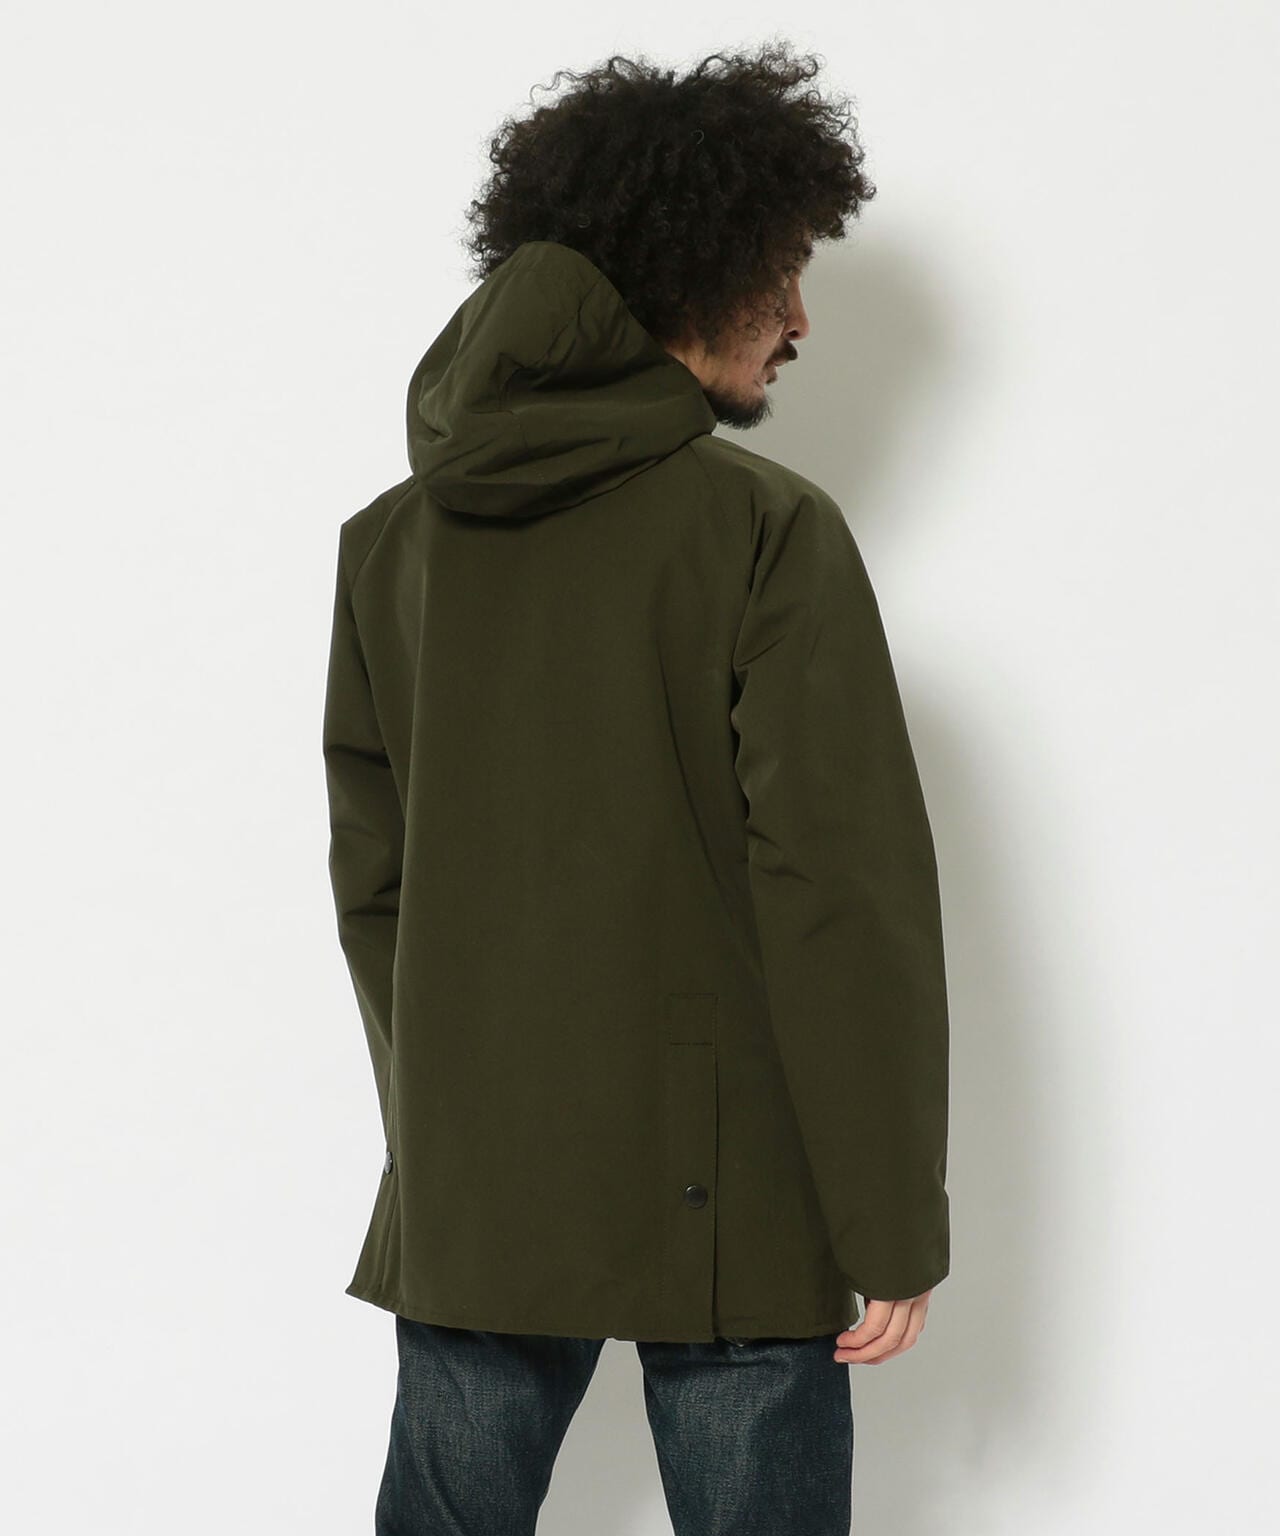 Barbour/バブアー HOODED BEDALE SL 2LAYER フーデッドビデイル SL 2